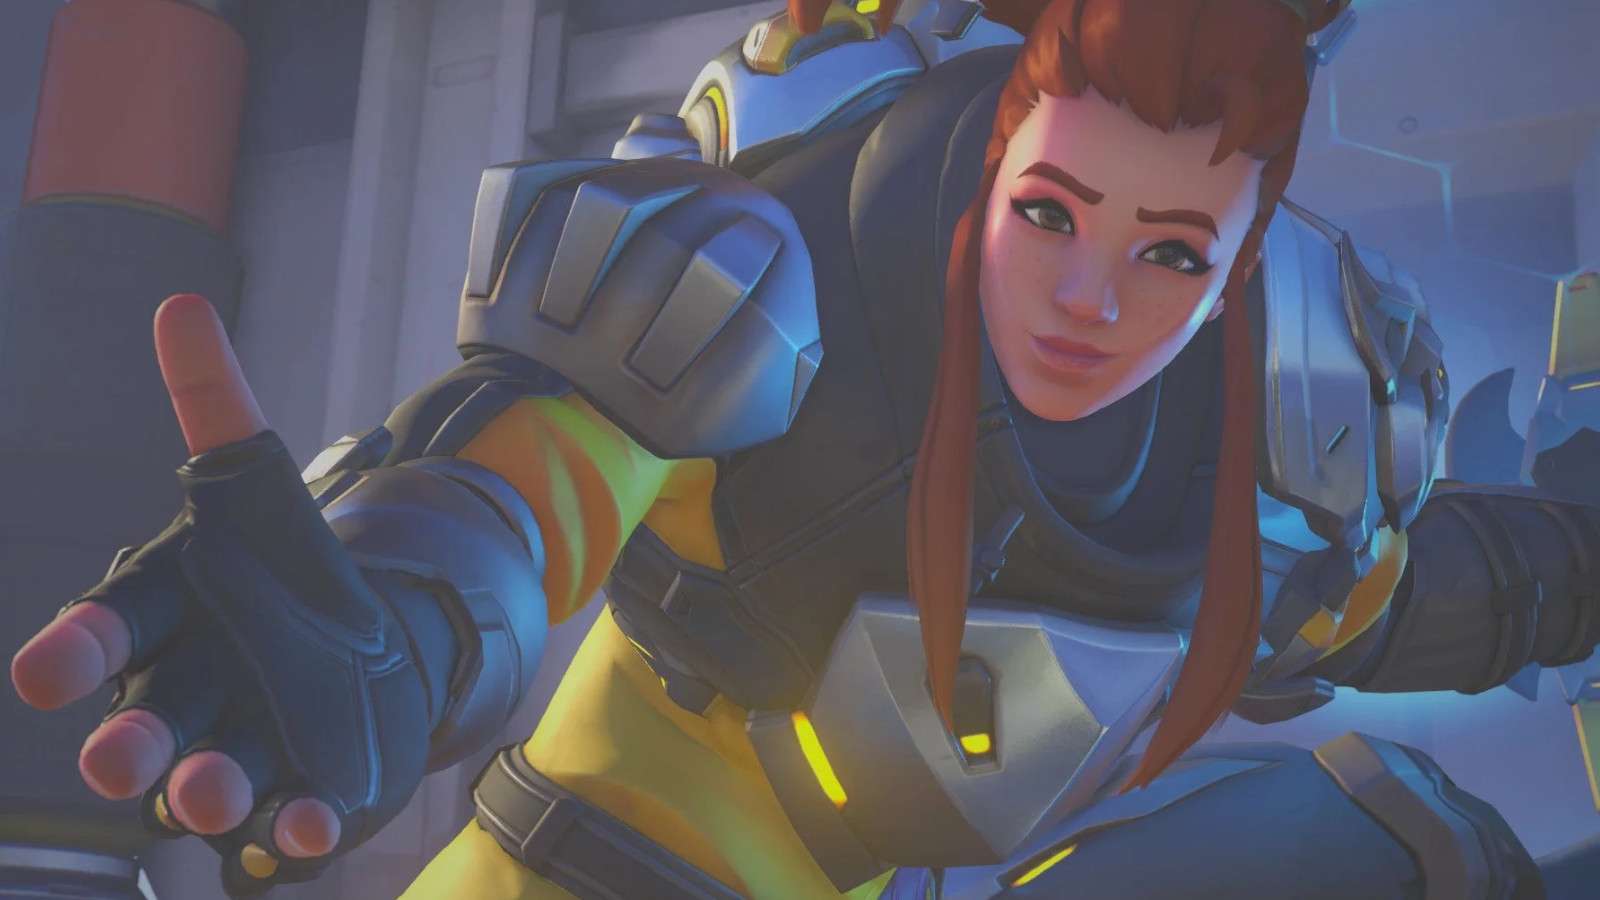 Overwatch 2 pride month comes to some countries following backlash